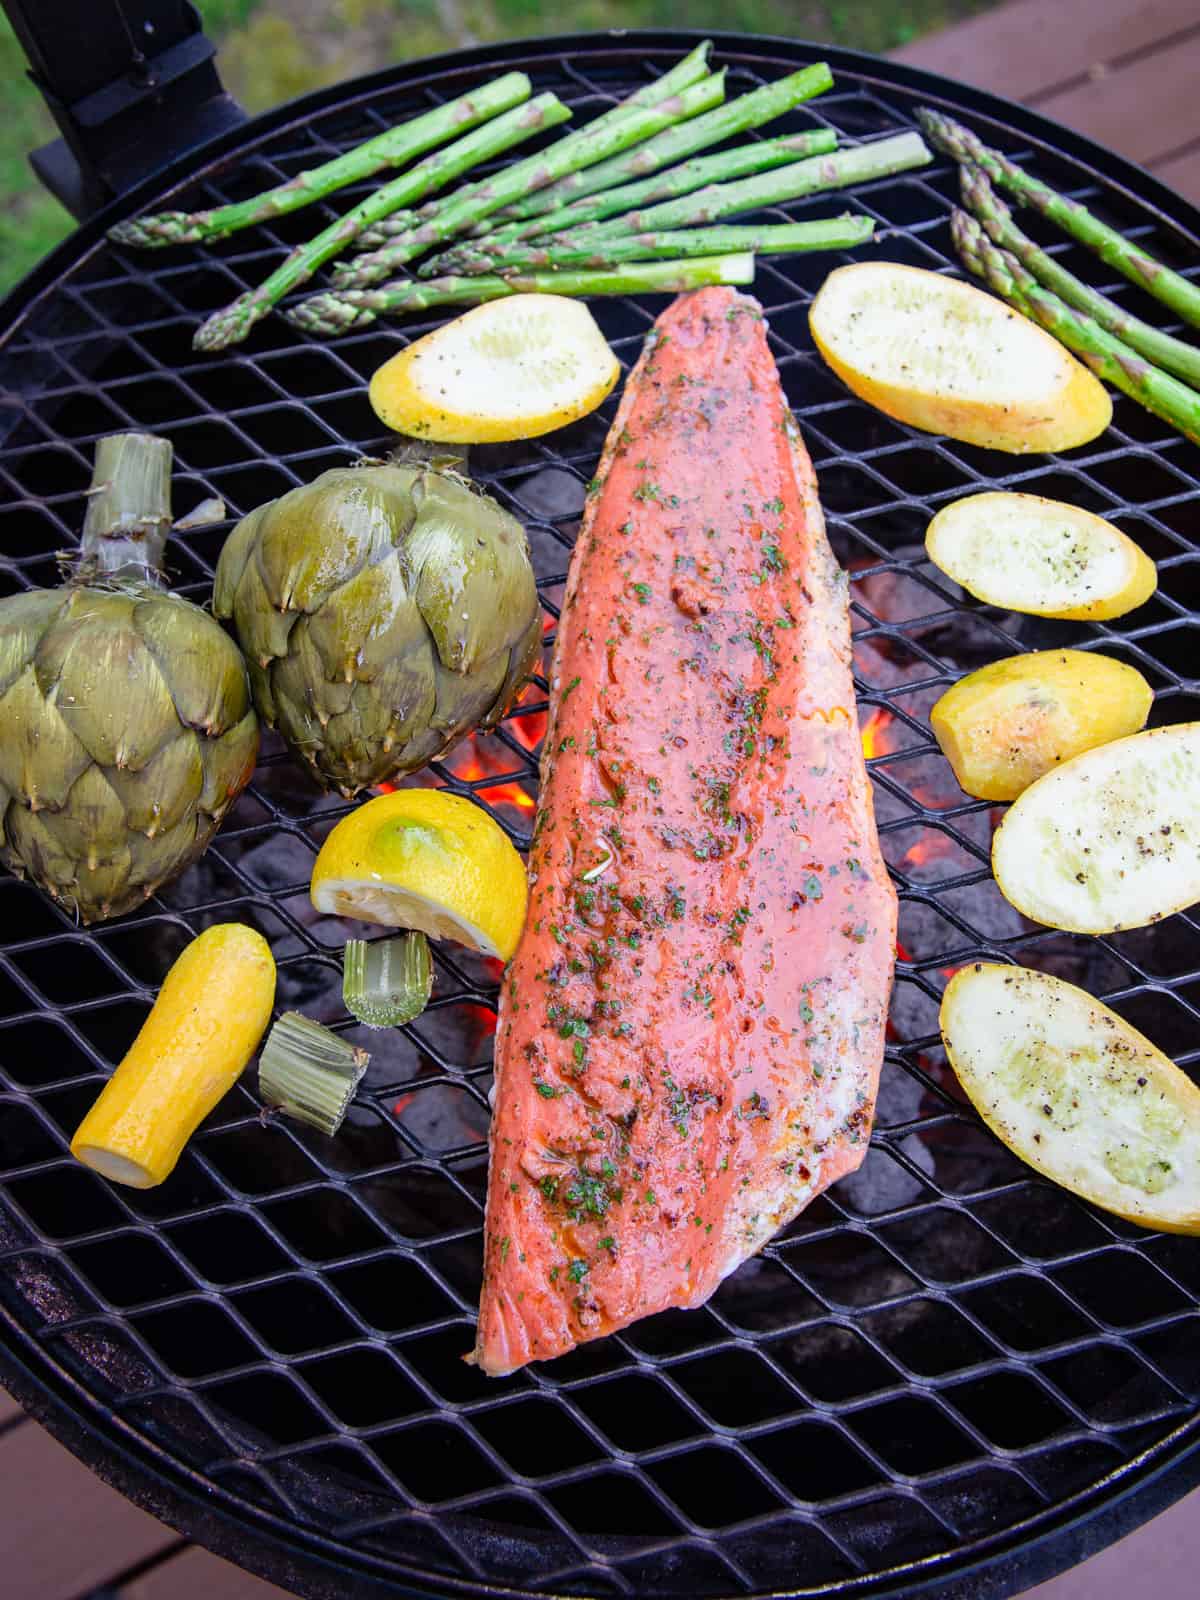 Grill the sockeye salmon with vegetables until the salmon is just cooked through.